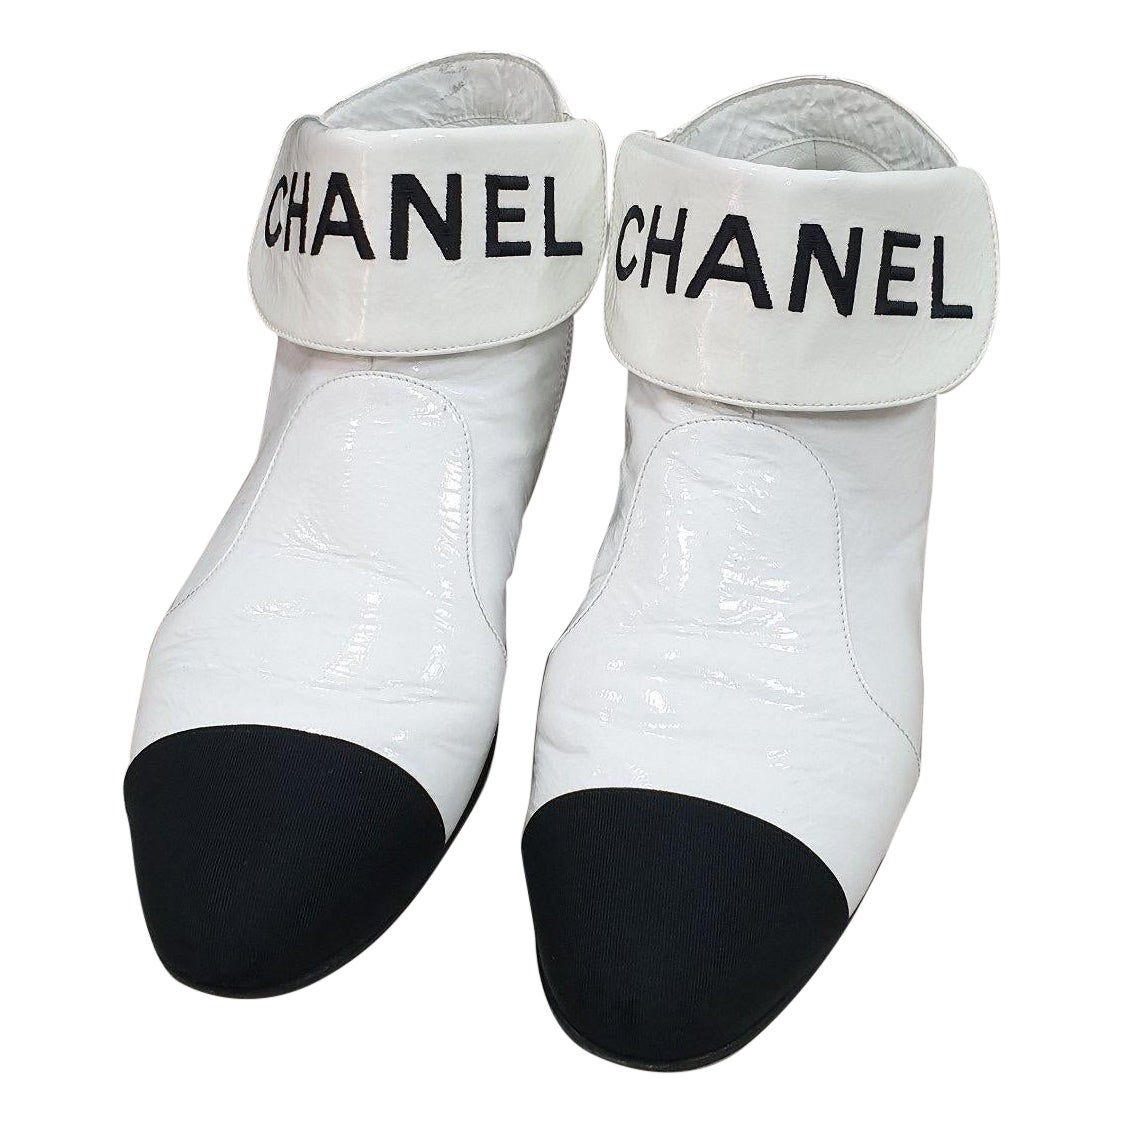 Chanel Boots 6 - 9 For Sale on 1stDibs  chanel nine boots, chanel 9 boots  meaning